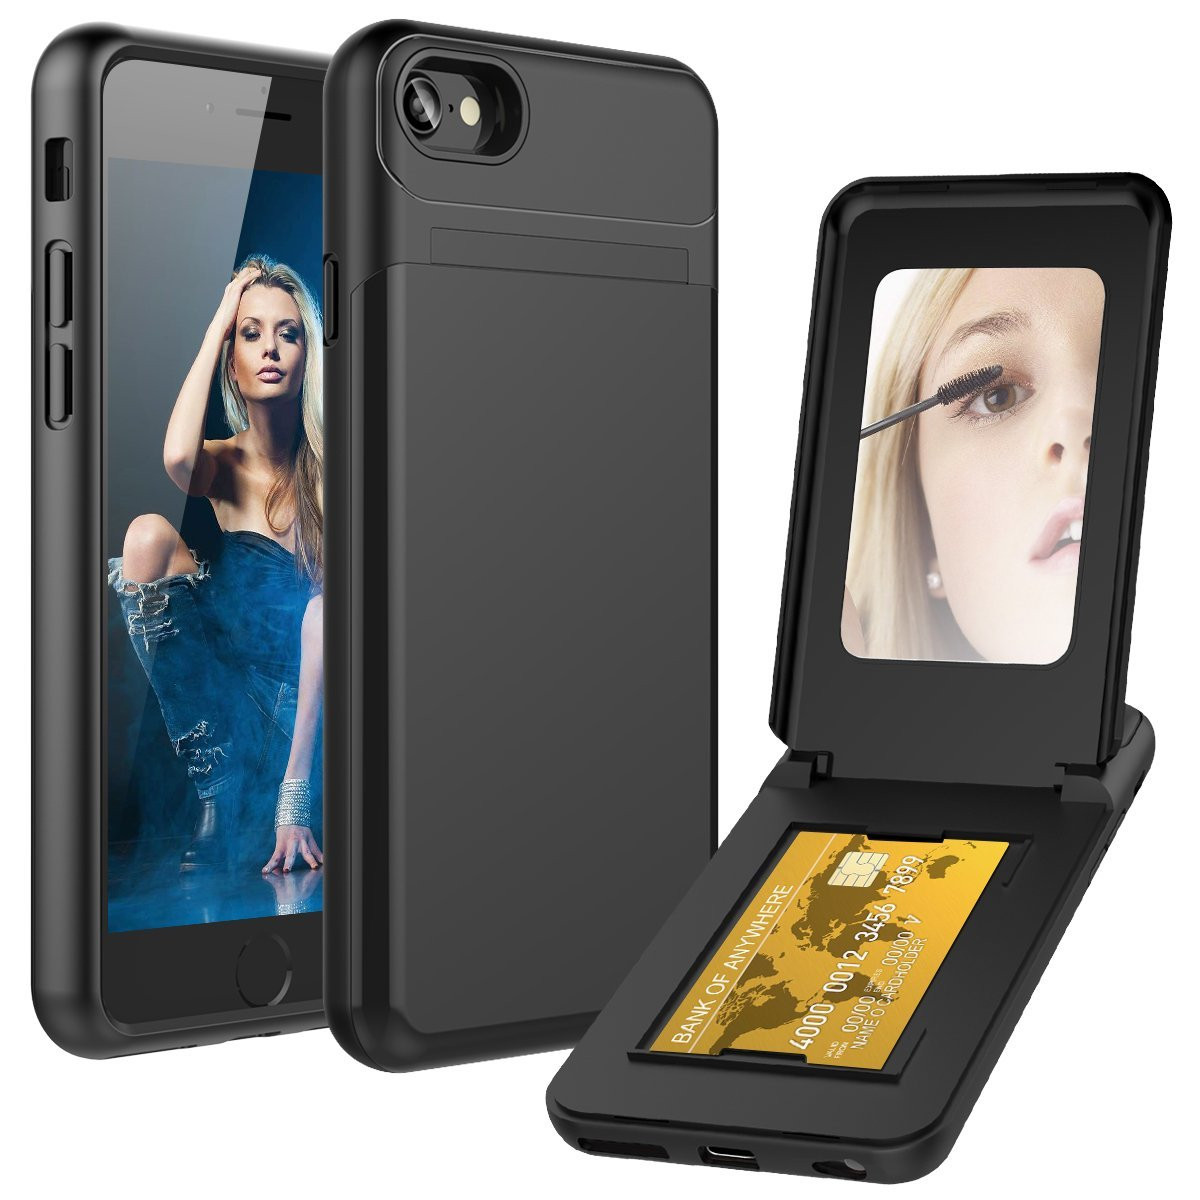 Apple iPhone 6 Plus -  Hard Phone Case with Hidden Mirror and Card Holder Compartment, Black